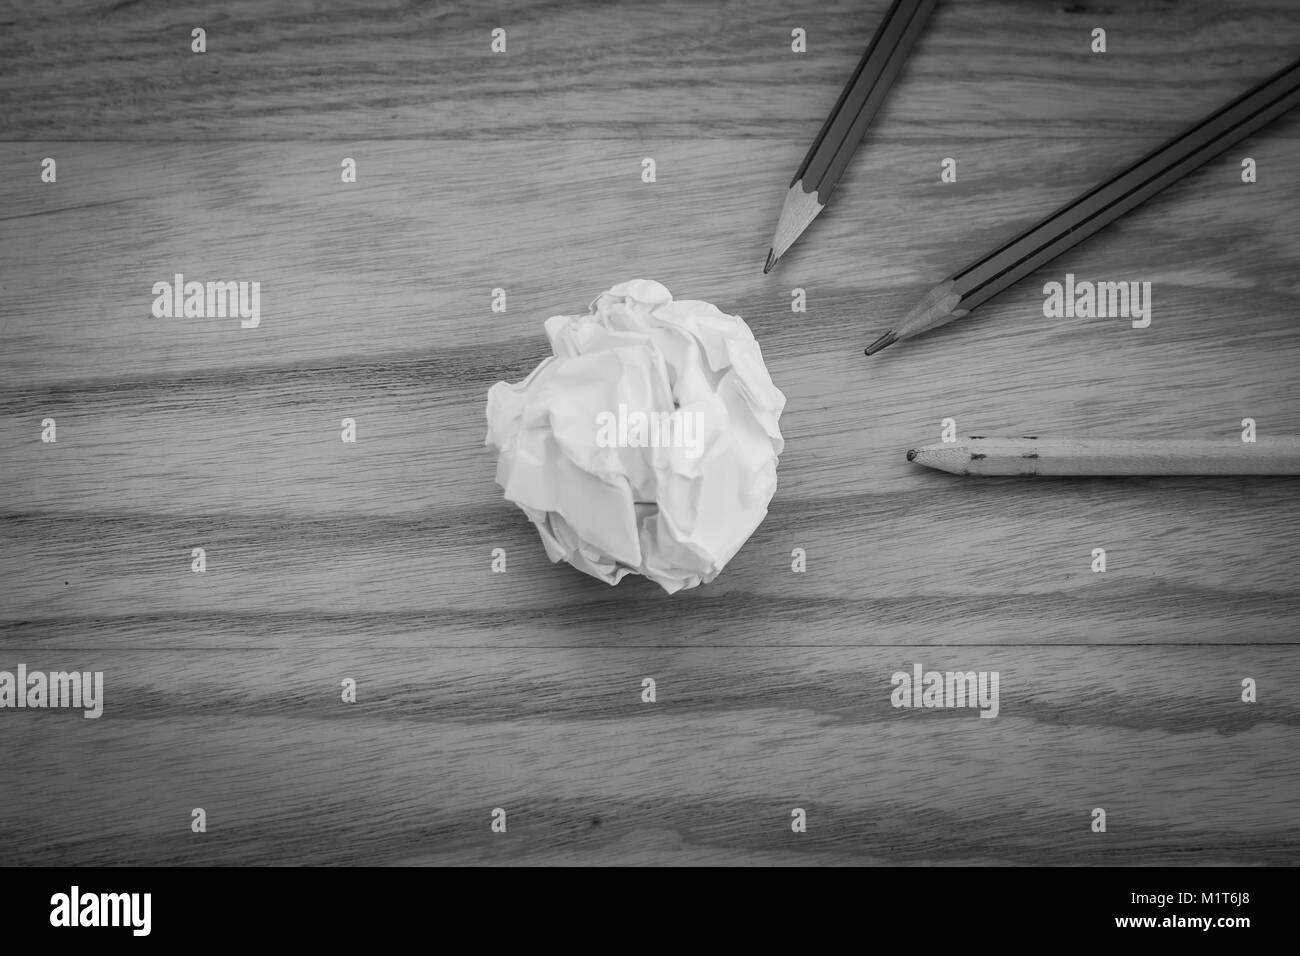 Business Creative and Idea Concept Top view of three pencil with white crumpled paper ball put on wooden floor in black and white image. Stock Photo